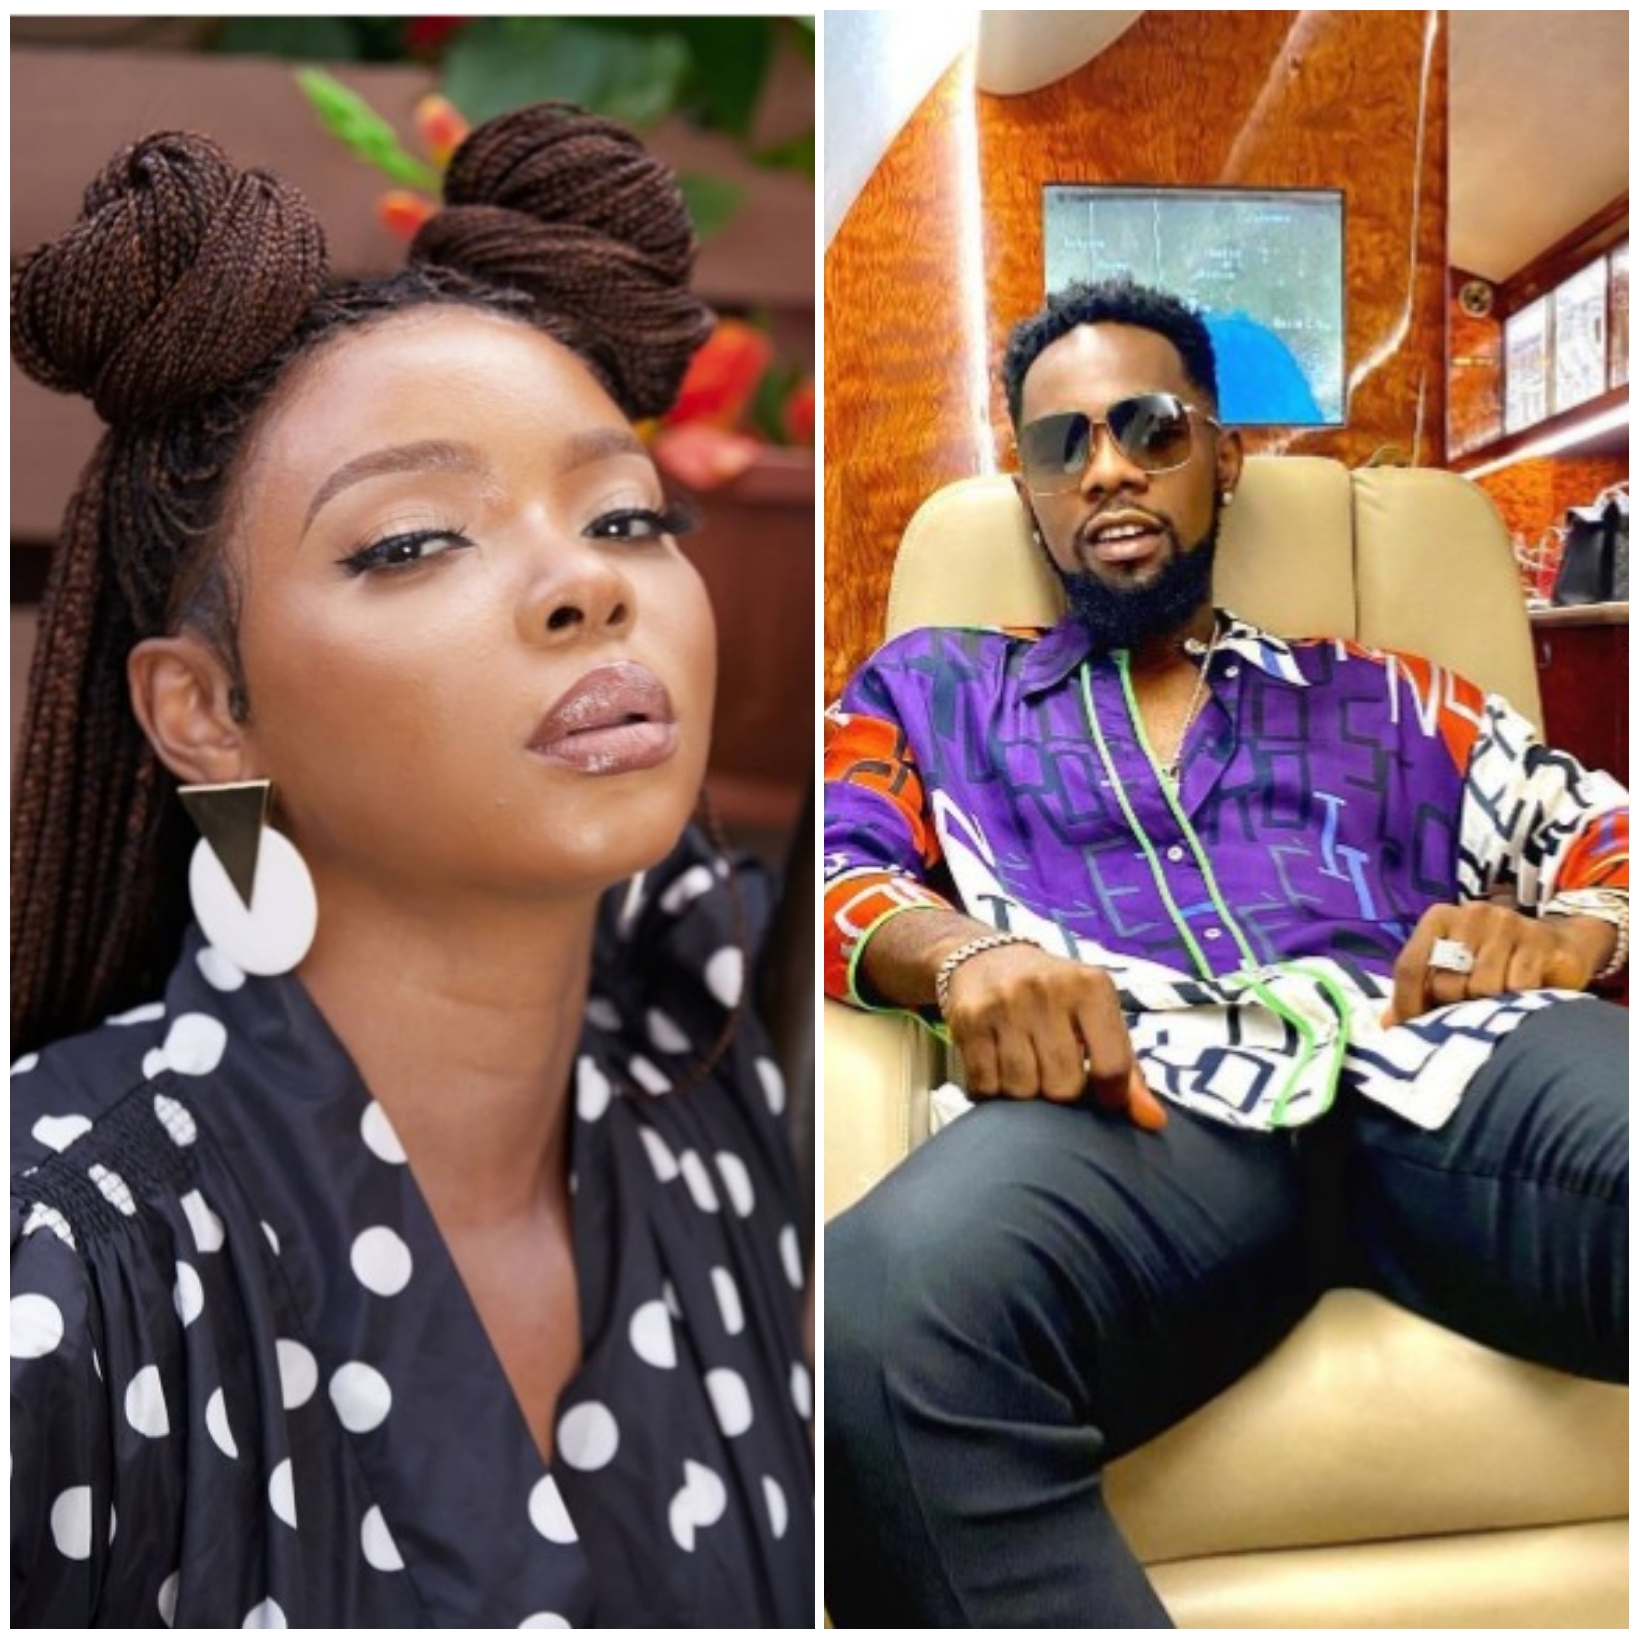 Is Patoranking In Love With Yemi Alade? As Fans Call For A Relationship